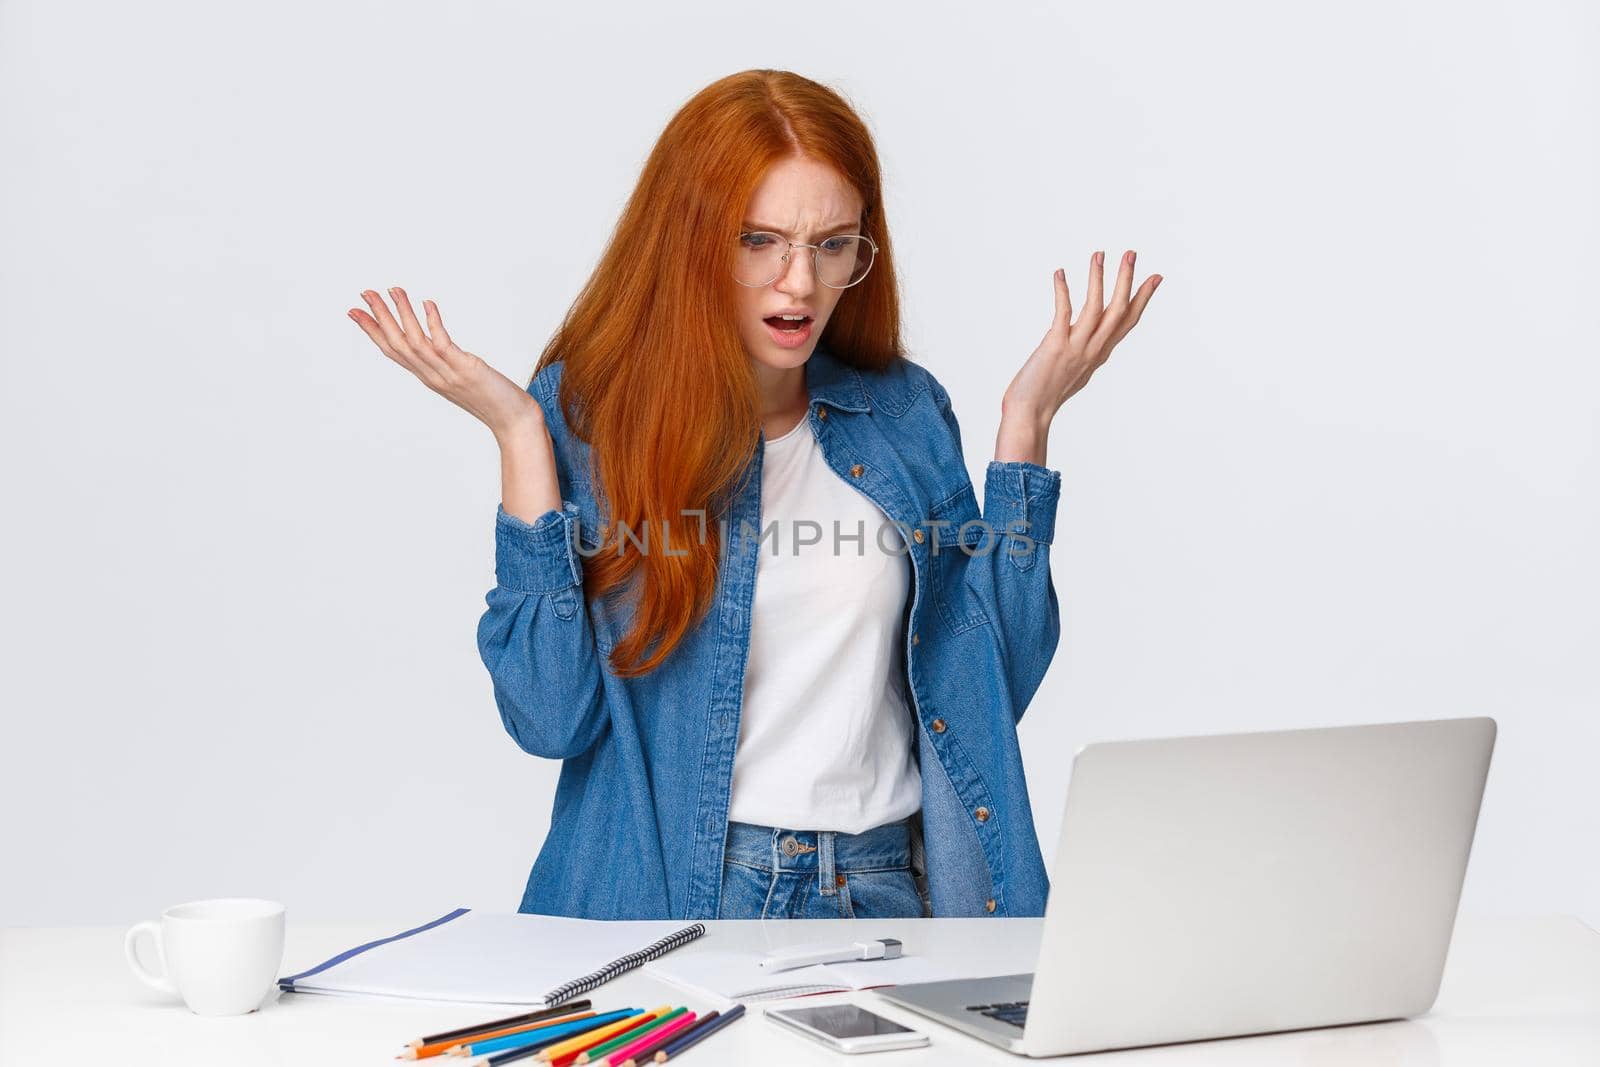 Mad and confused, frustrated redhead girl having troubles with computer, working on hard project, raising hands up dismay and annoyance, shrugging, stare laptop screen bothered.